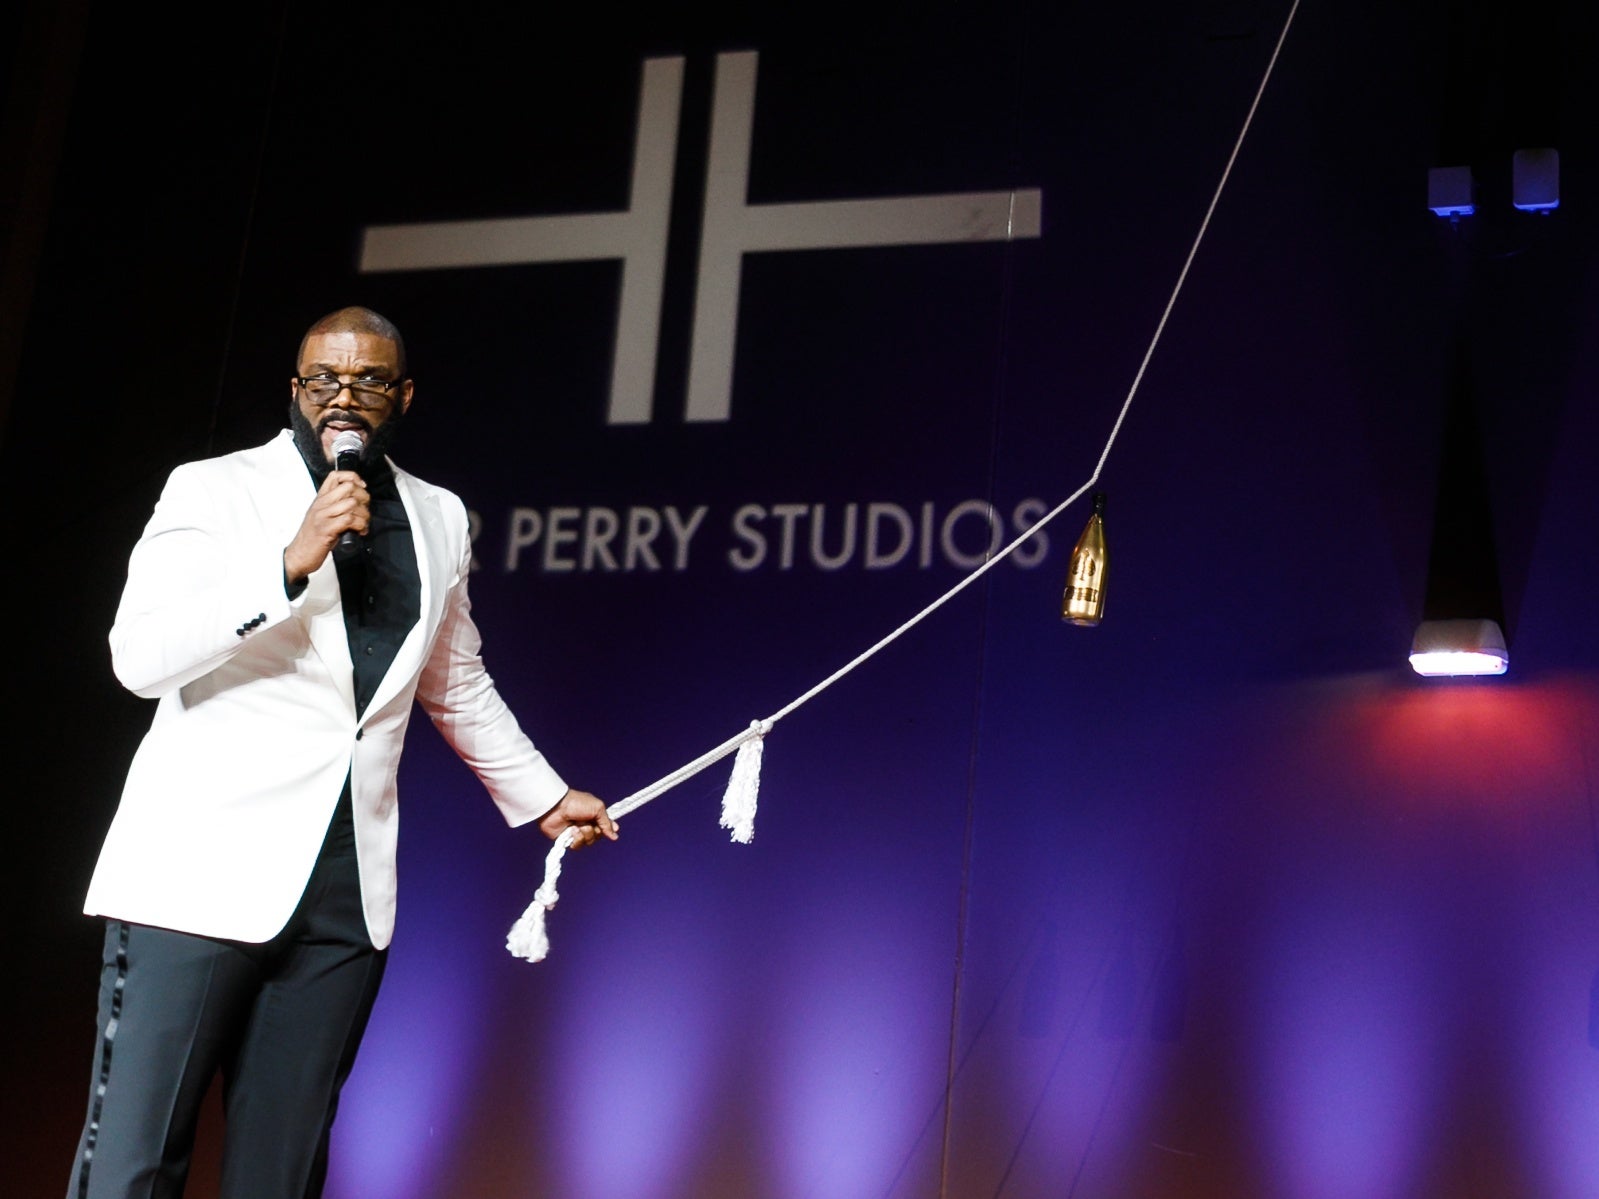 Tyler Perry Reveals Next Goal To Build A Shelter For Trafficked Girls, Boys And Battered Women